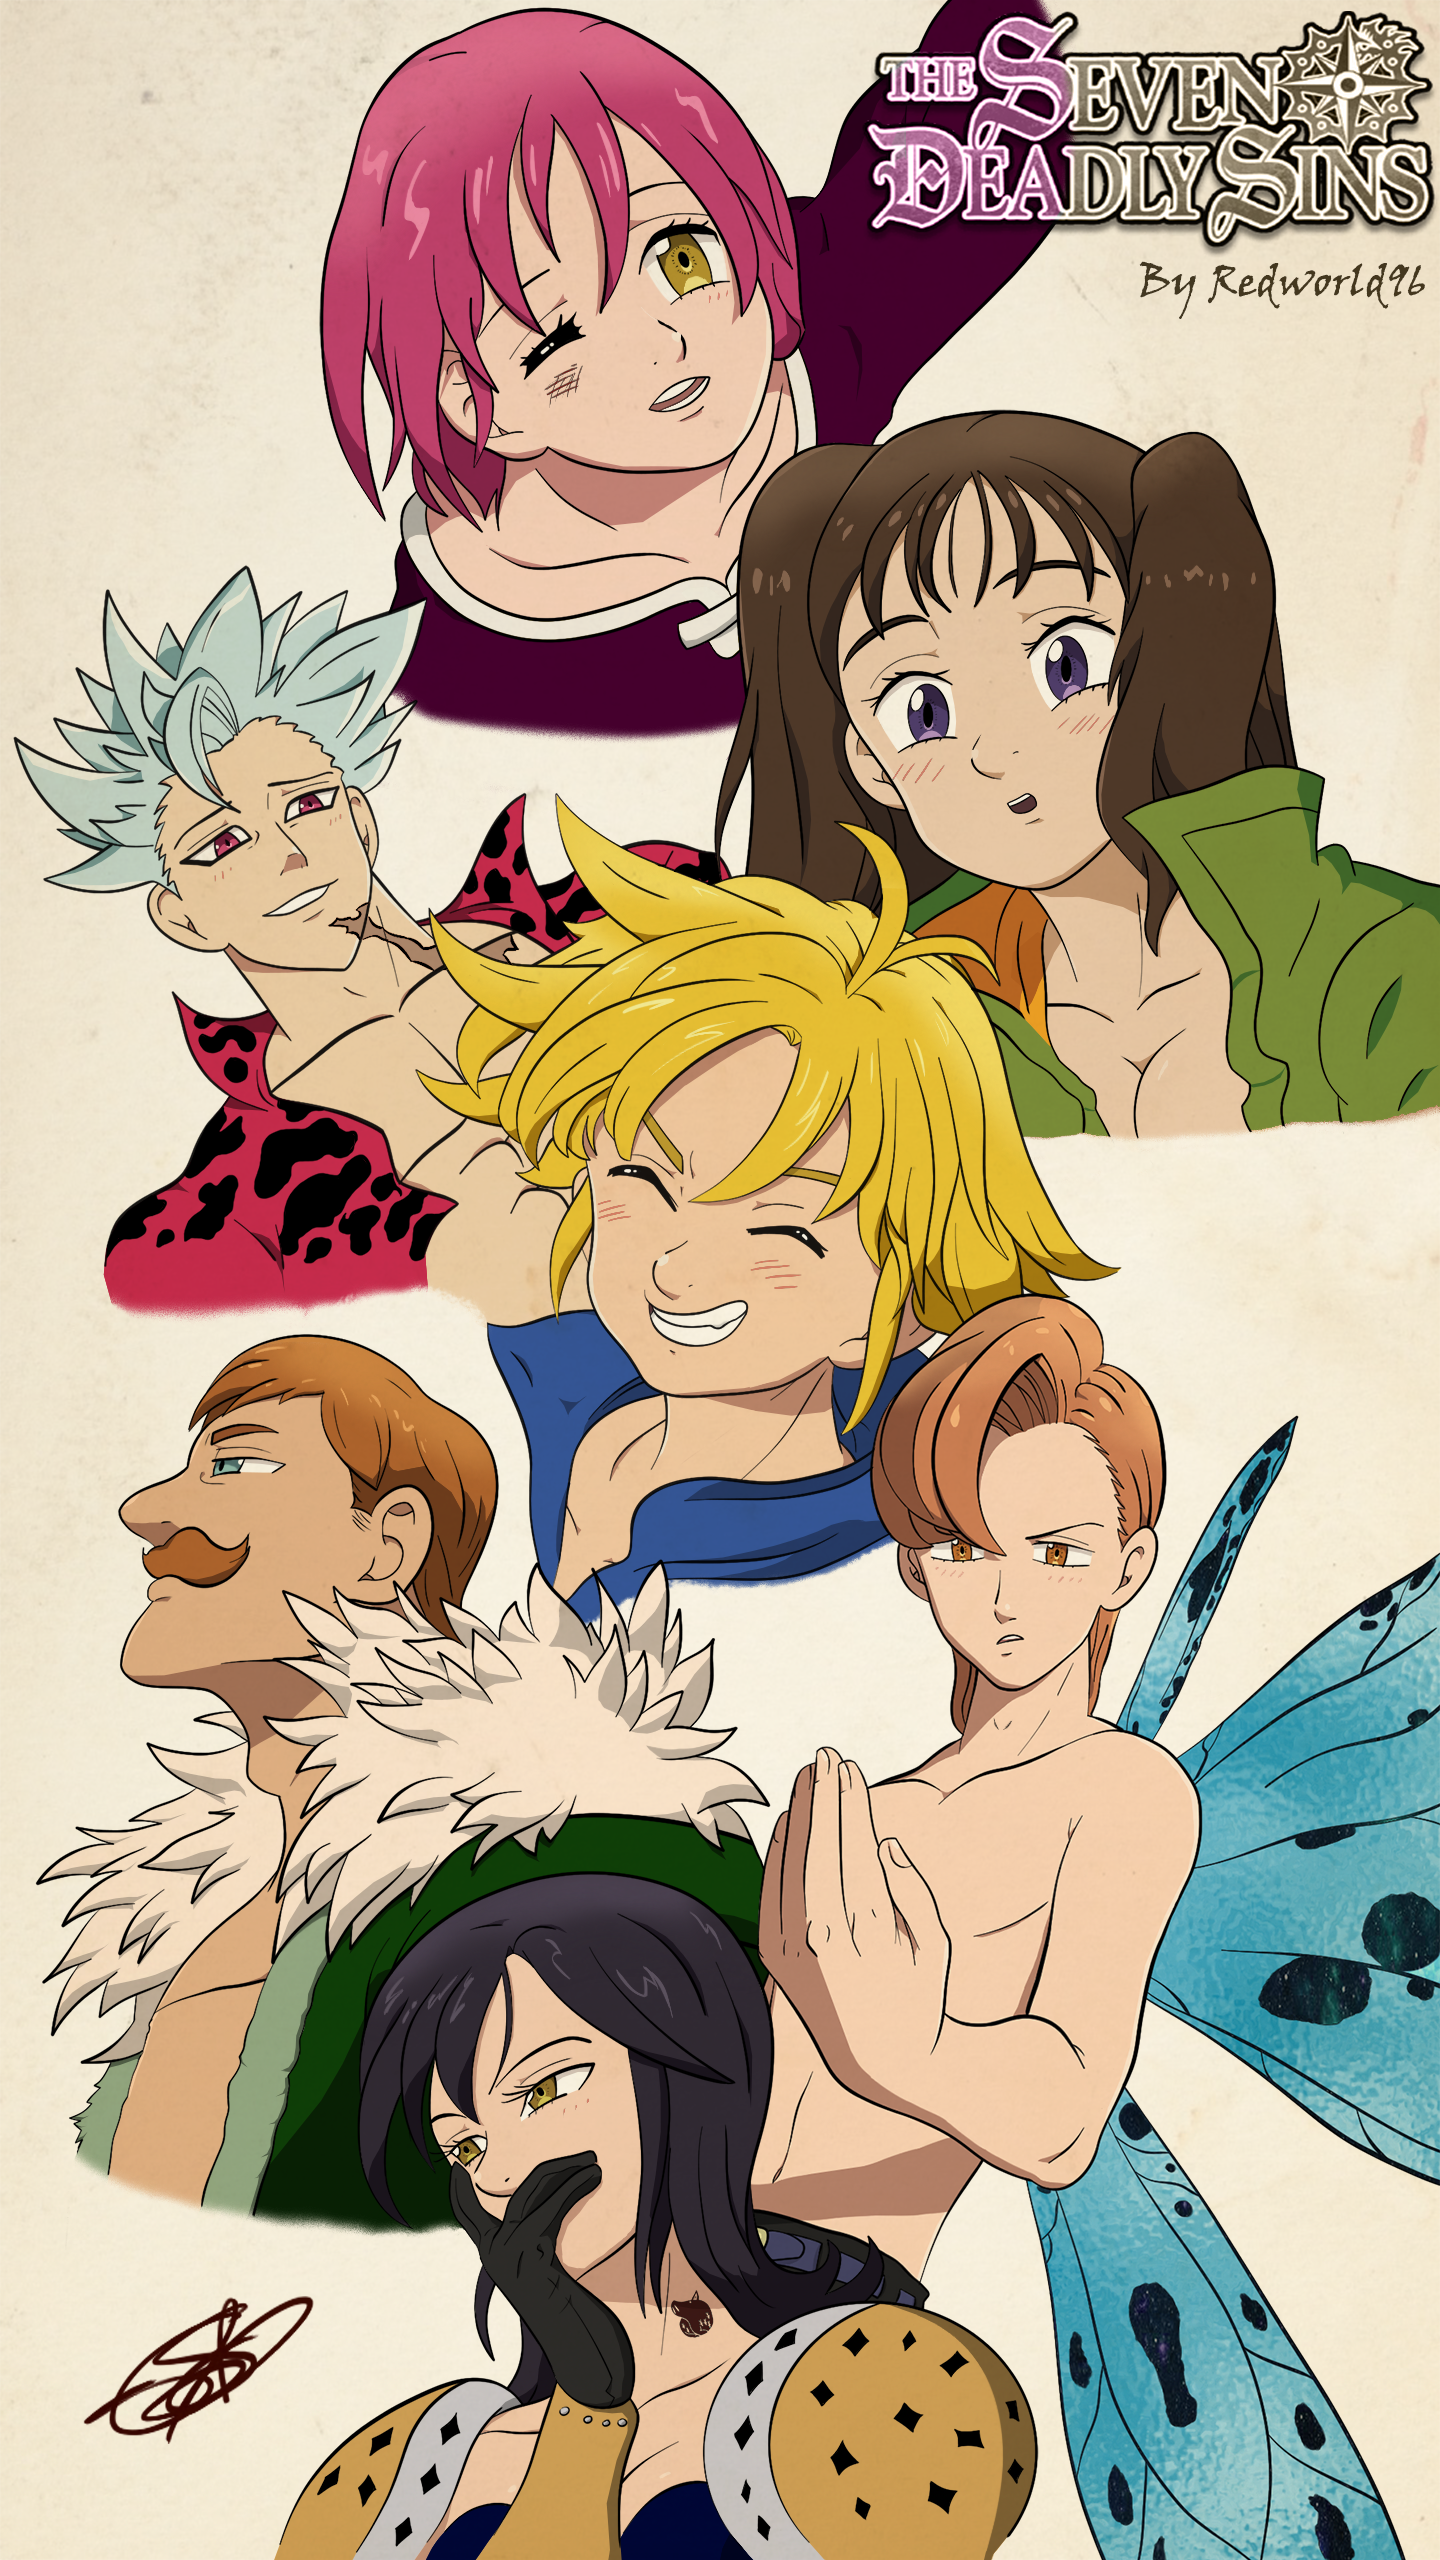 Anime The Seven Deadly Sins HD Wallpaper by Trazo17